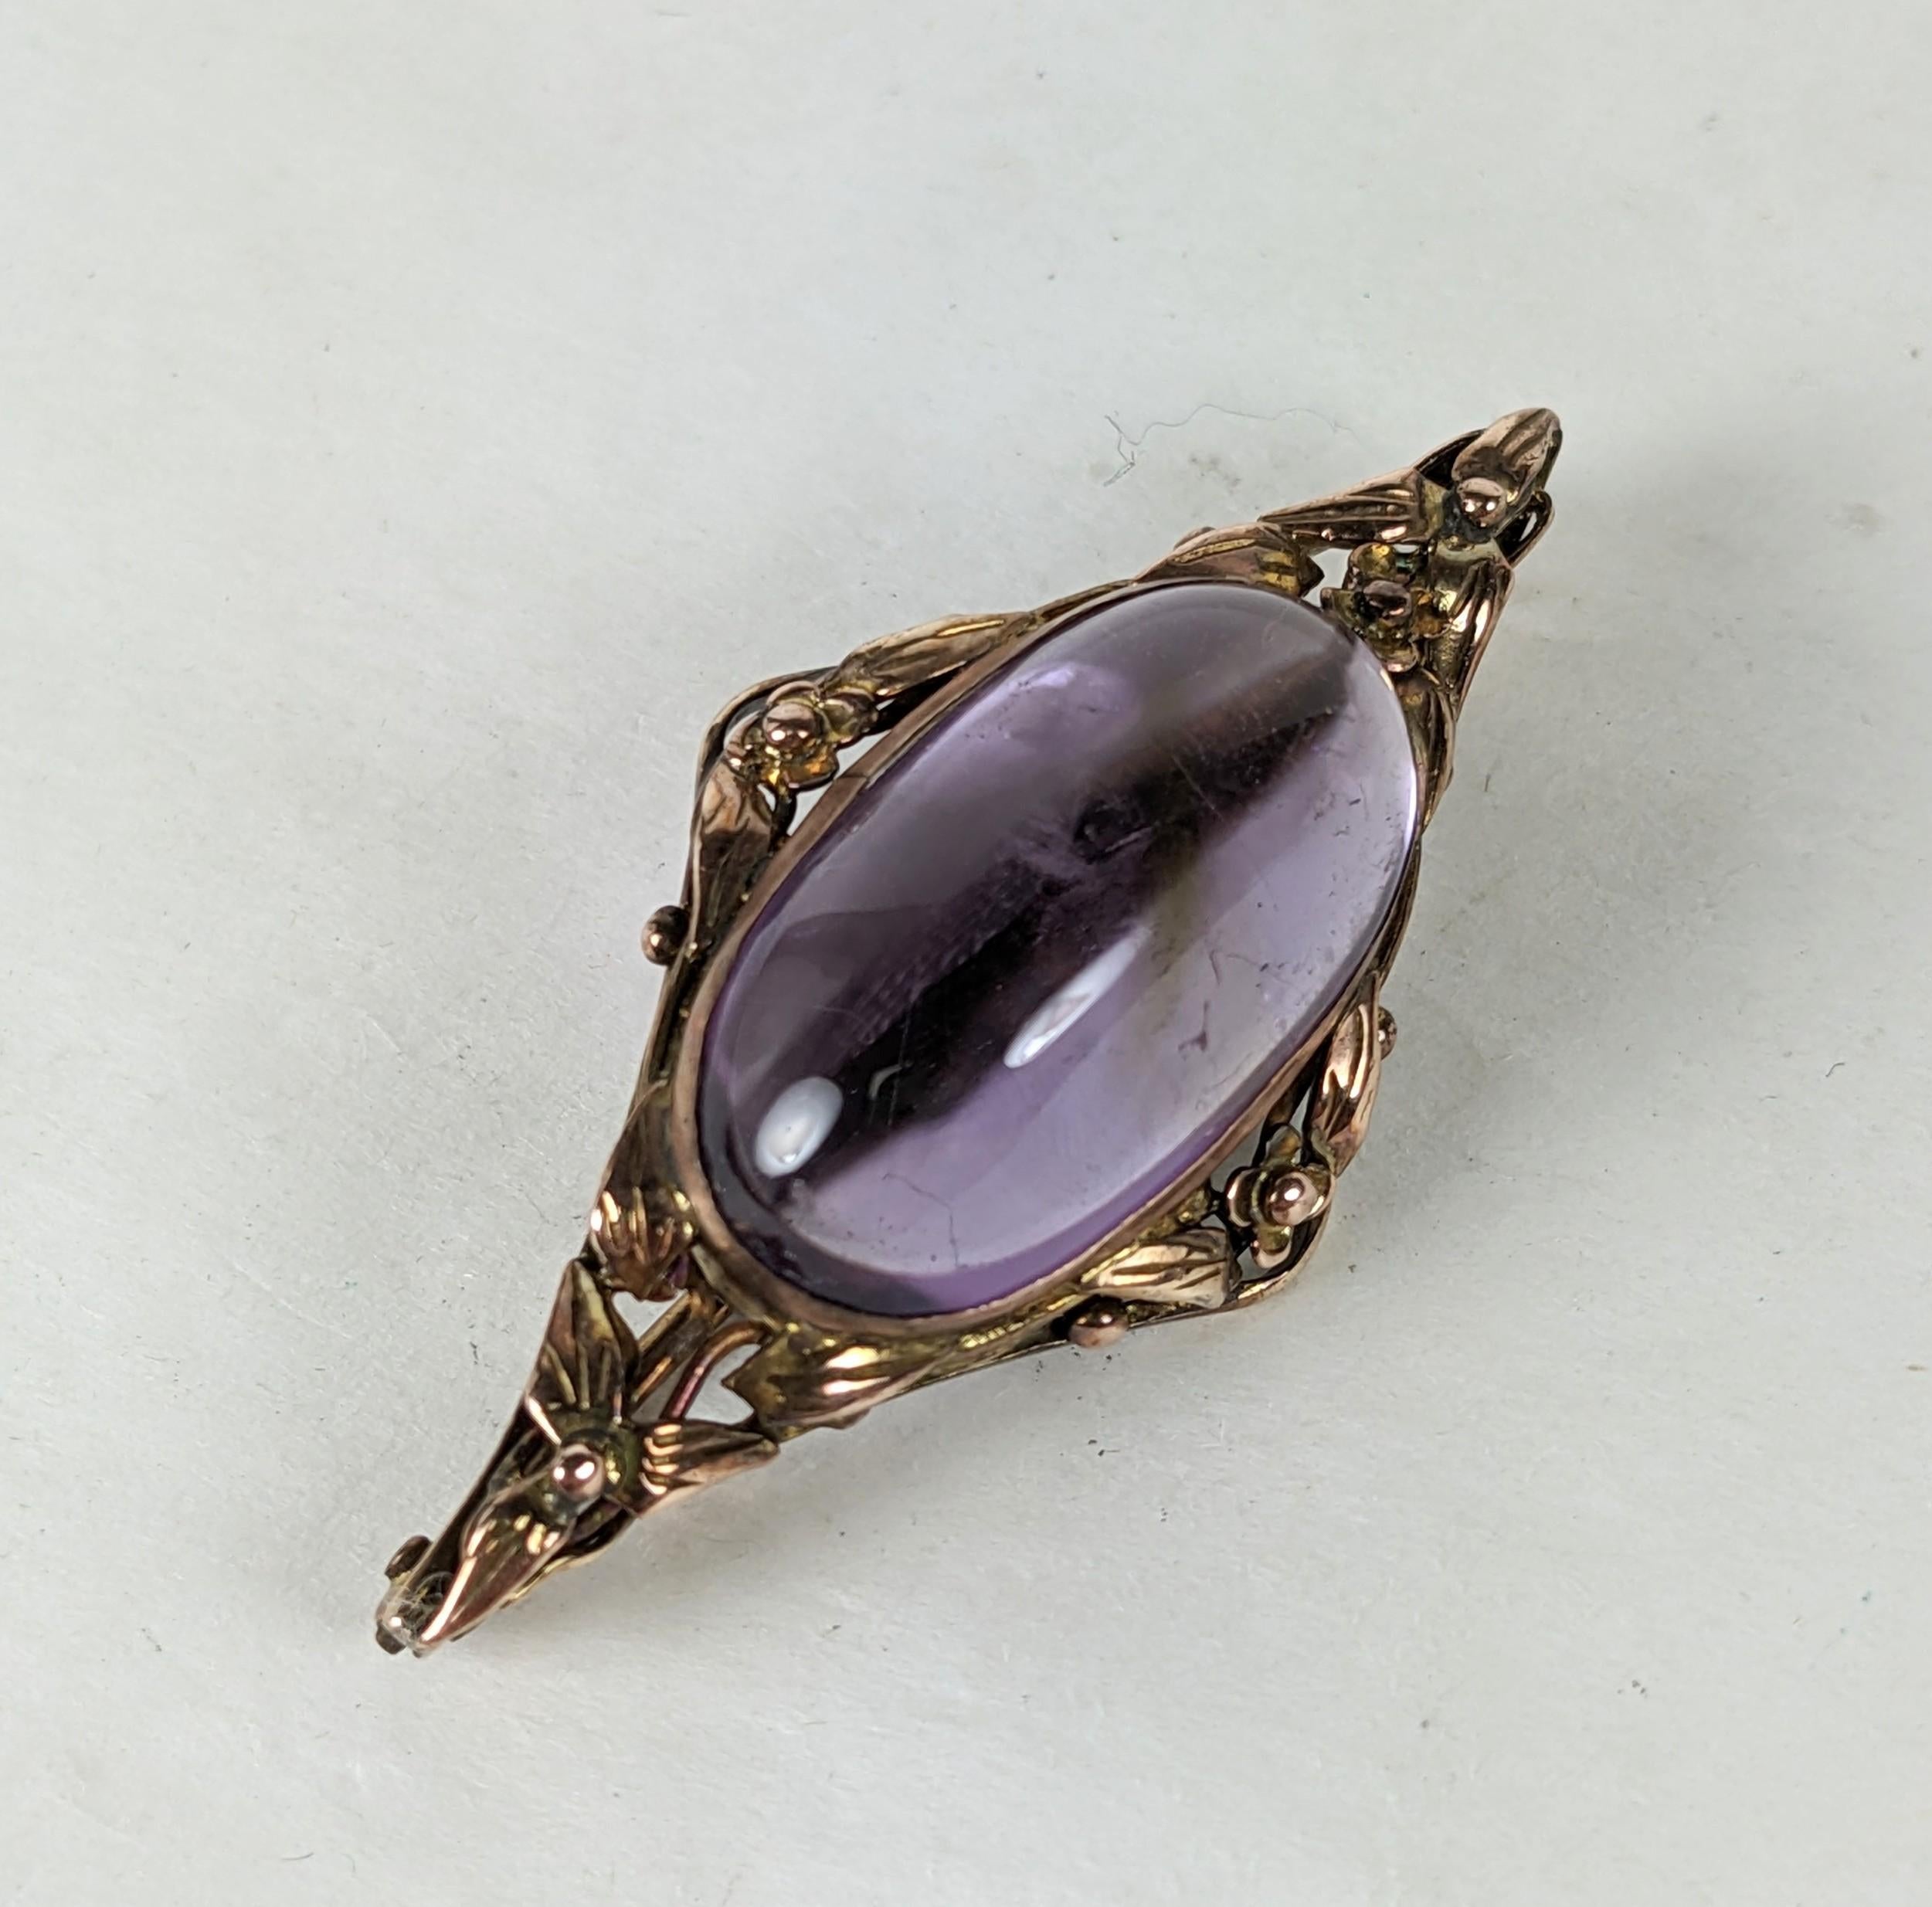 Arts and Crafts Amythest Cab Floral Brooch in low carat pink gold from the early 20th Century. Completely hand made with floral and leaf border around a large oval cab amythest. 1900 USA or UK.  1.75